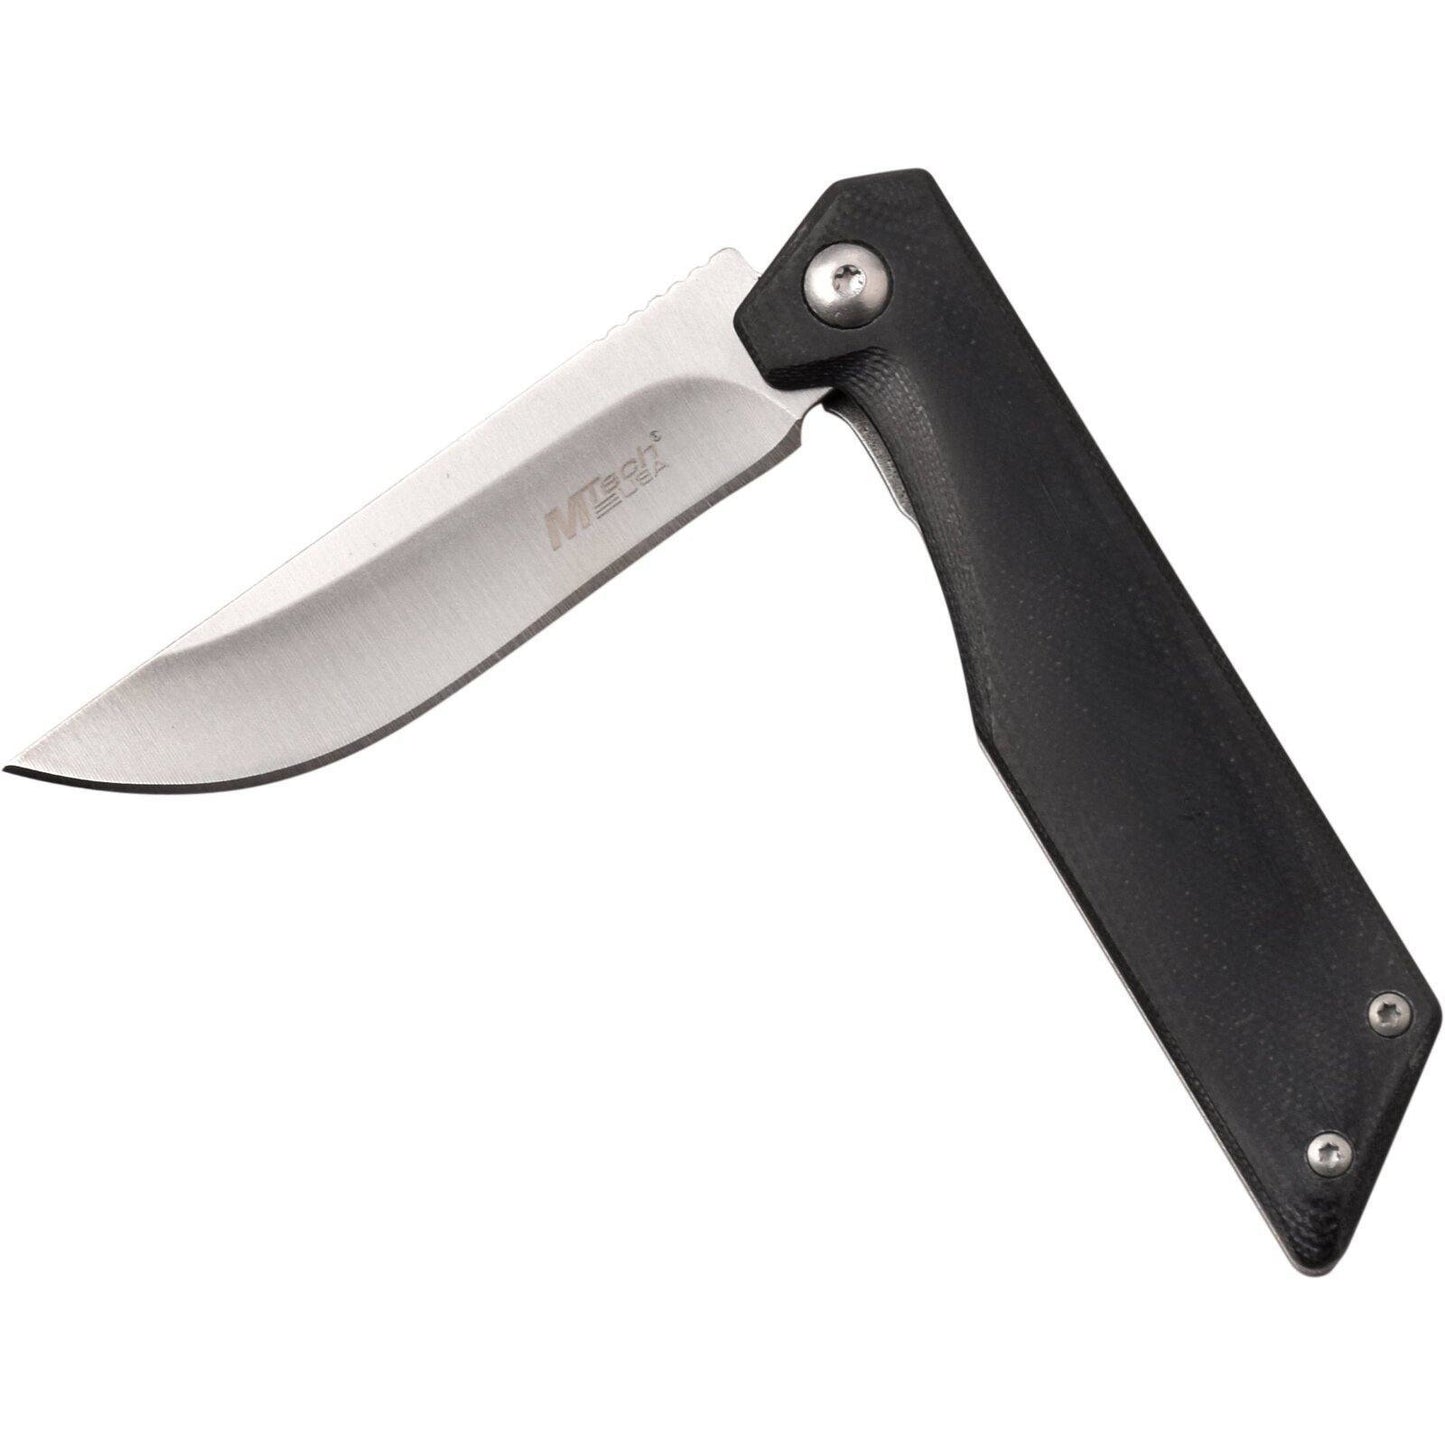 Mtech Drop Point Fine Edge Blade Folding Knife - 7 Inches Overall G10 Handle #mt-1160Ls - Xhunter New Zealand